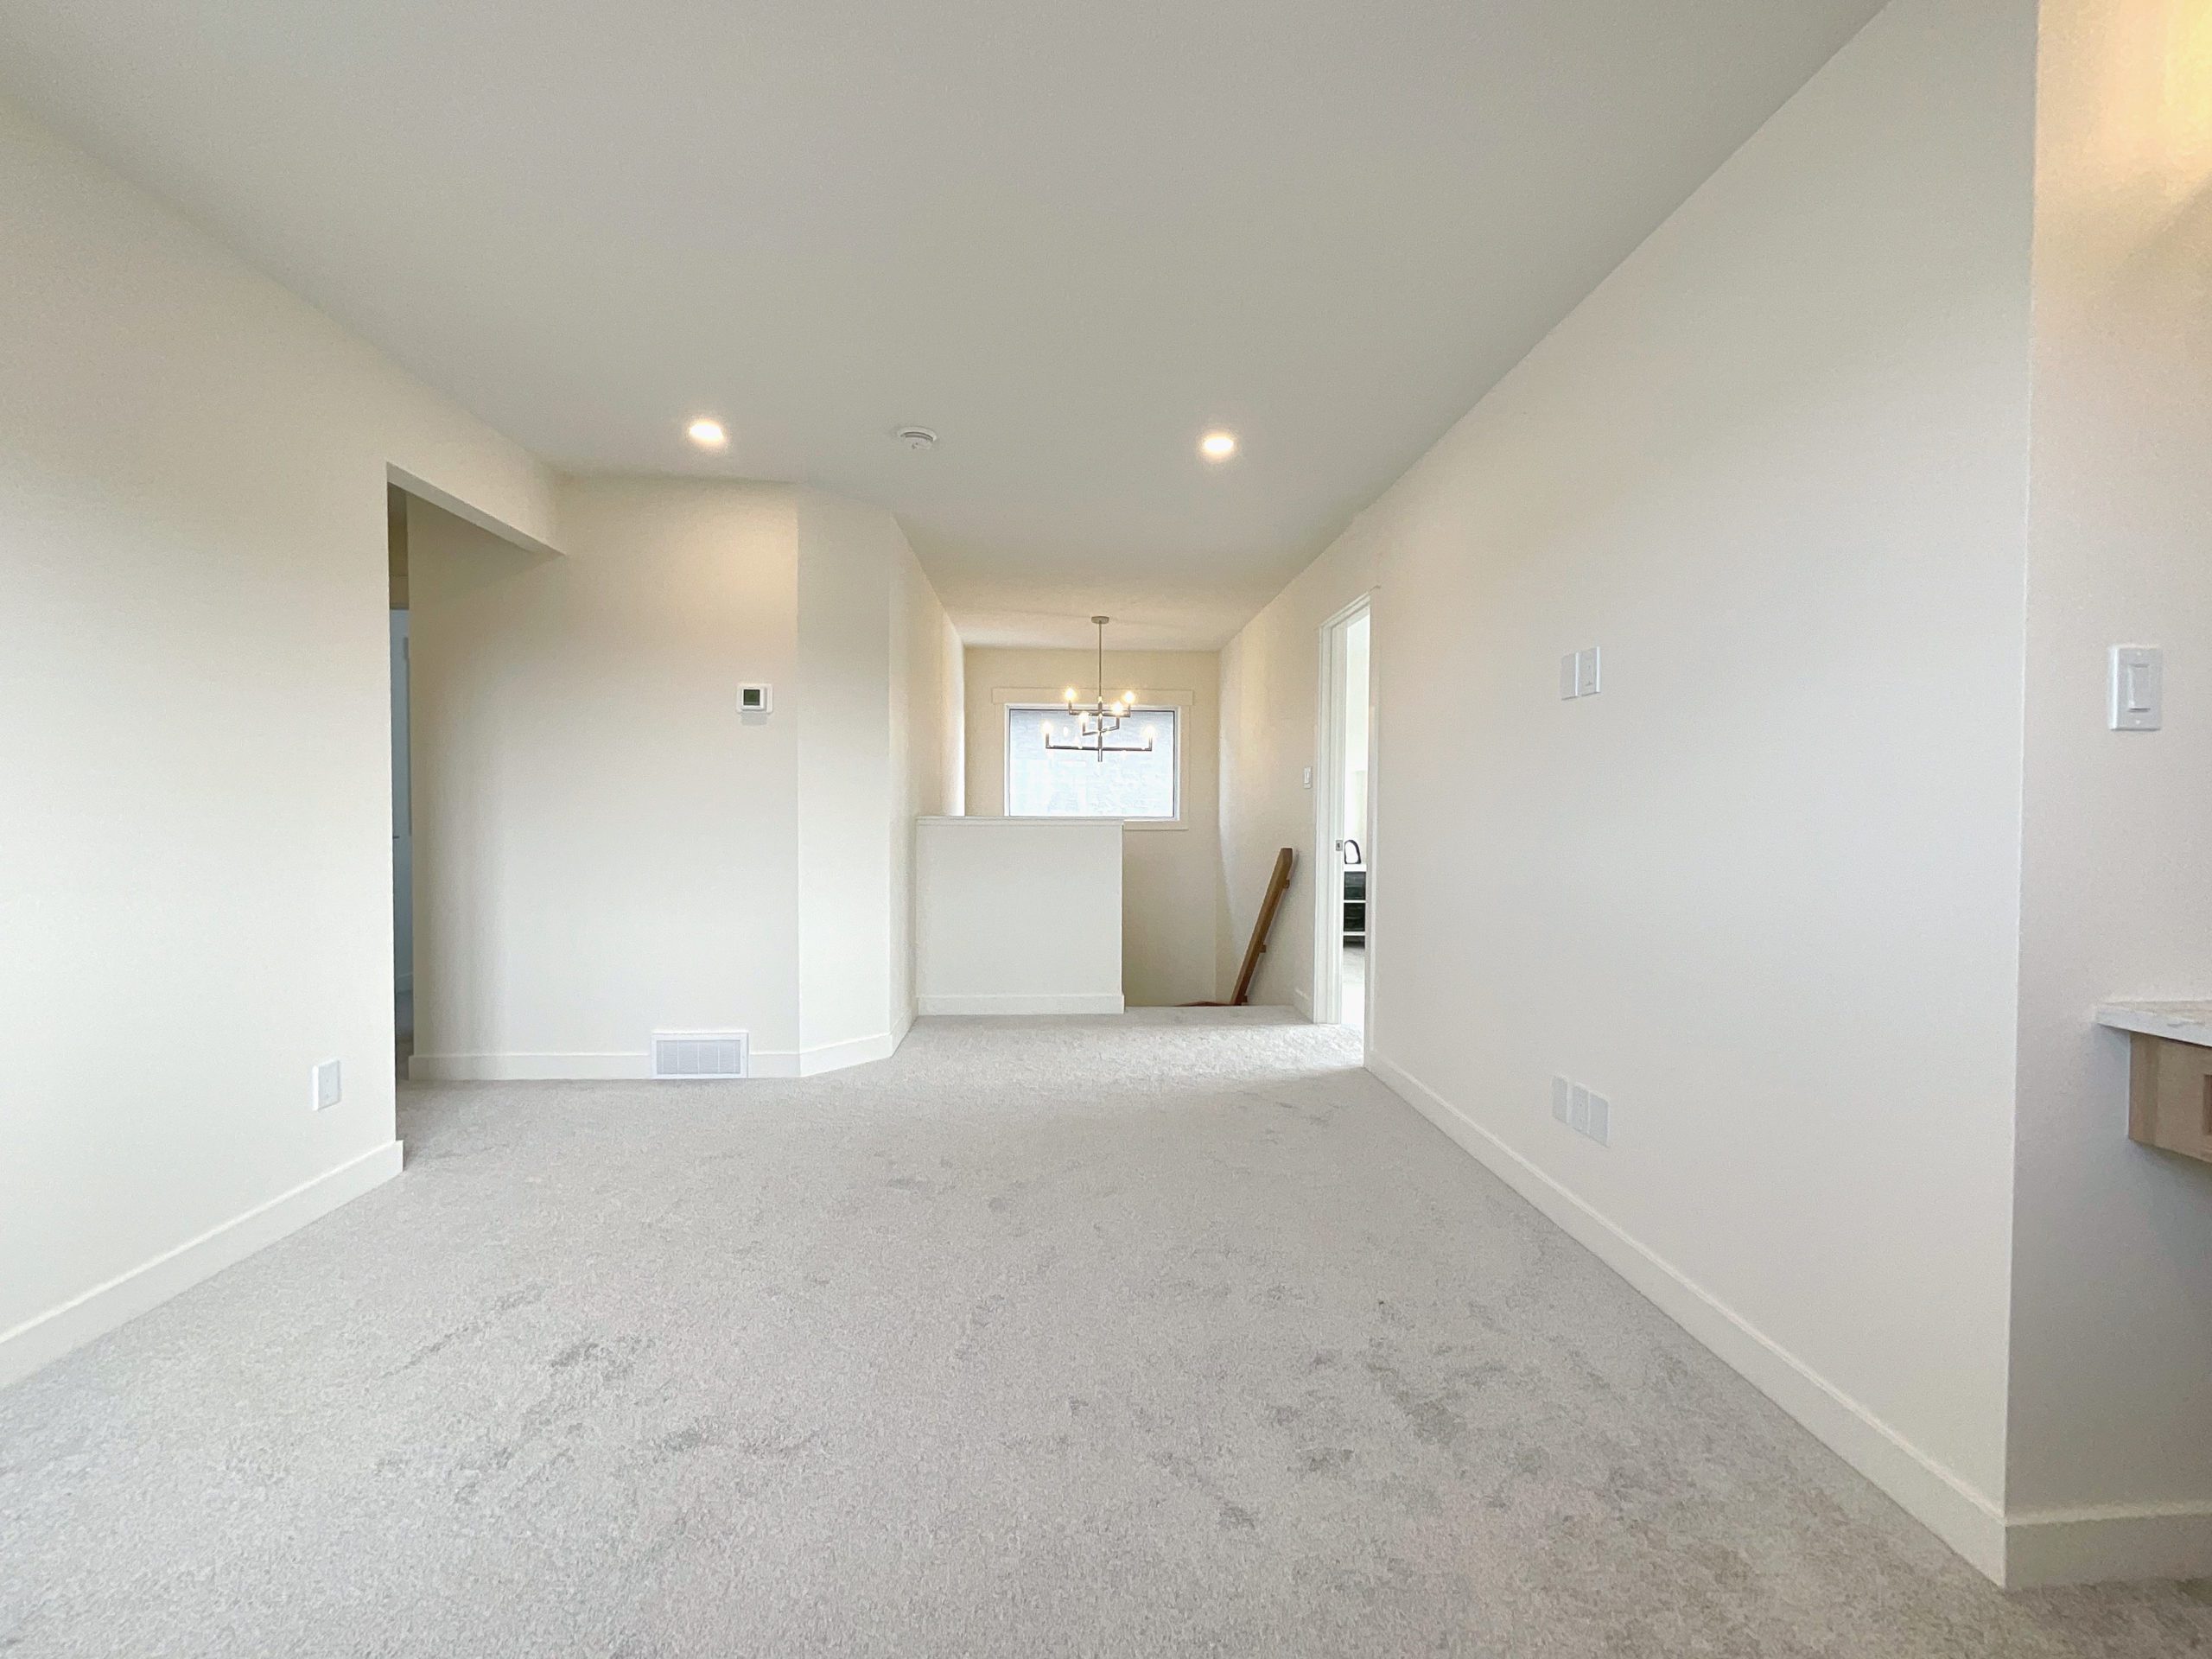 An empty bonus room with white walls and carpet flooring, shows the stairwell to main level and chandelier.